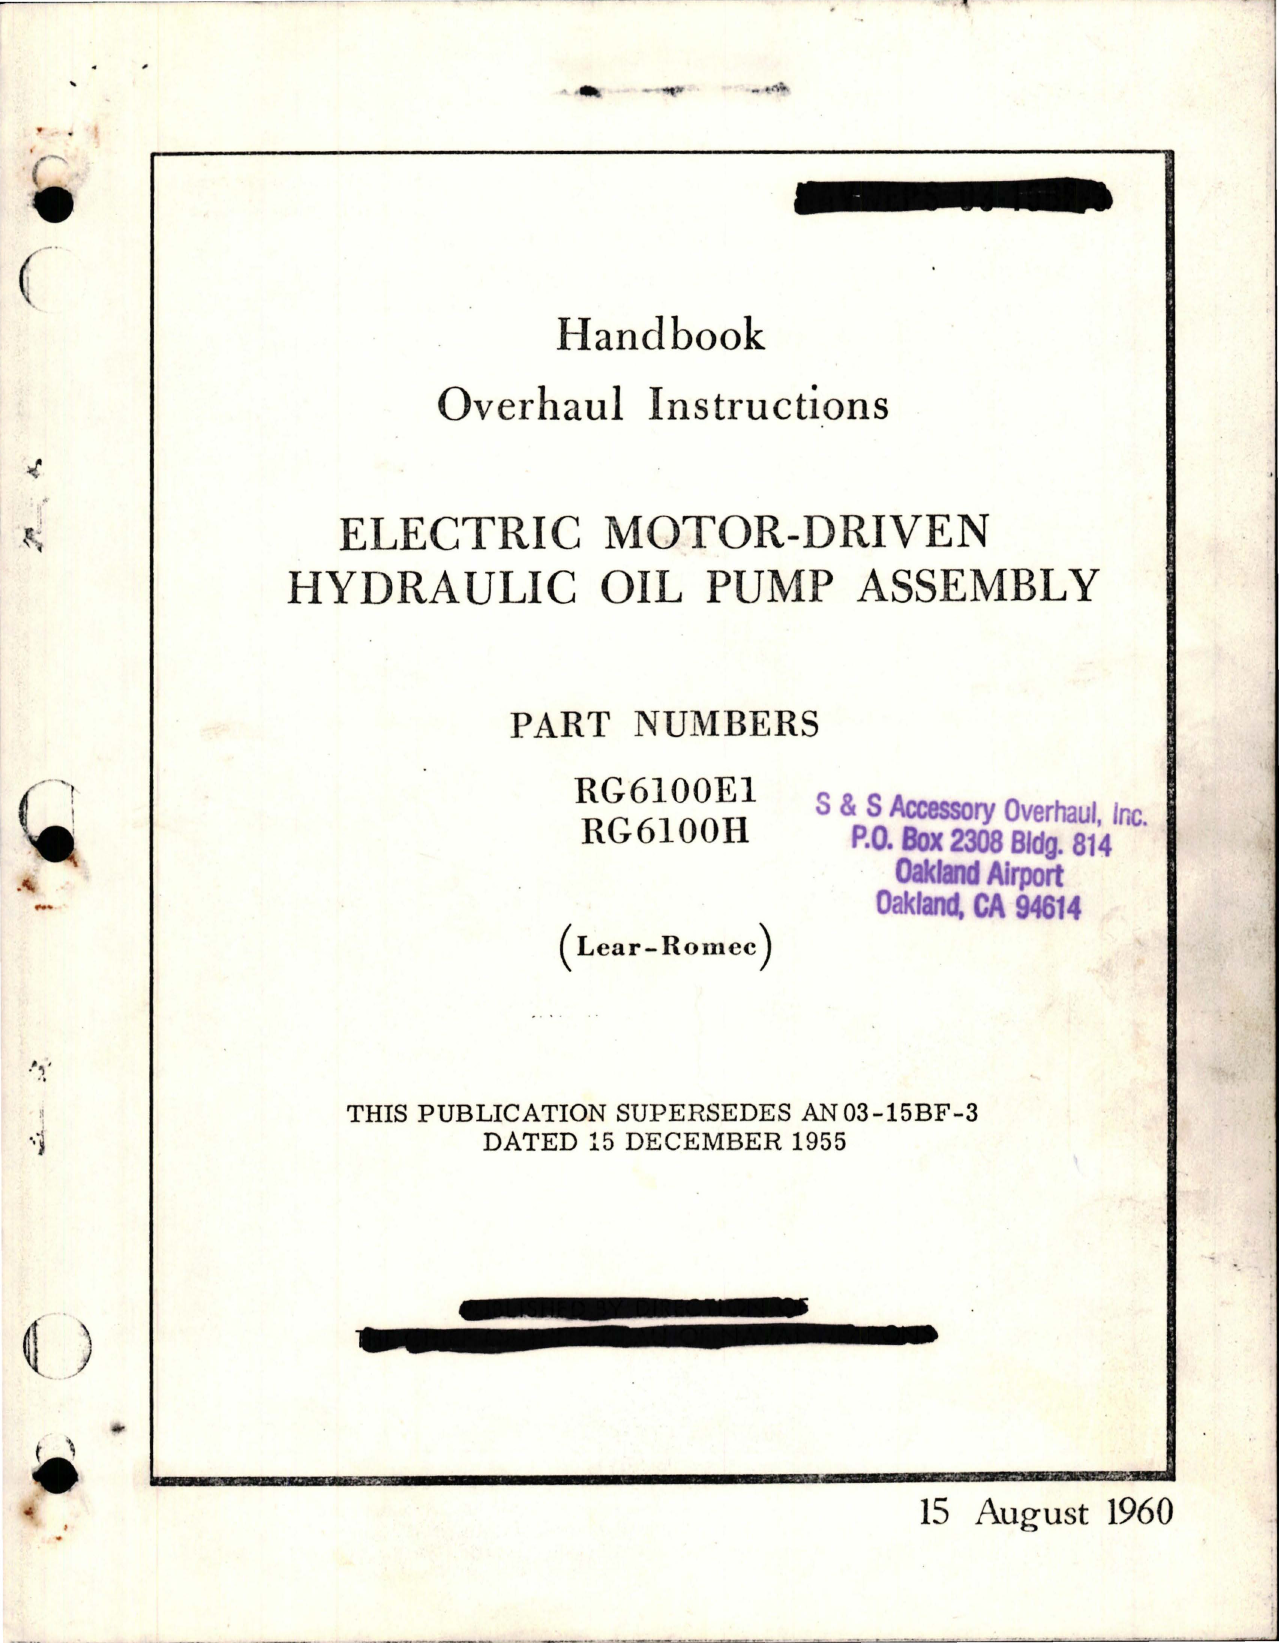 Sample page 1 from AirCorps Library document: Overhaul Instructions for Electric Motor Driven Hydraulic Oil Pump Assembly - Parts RG6100E1 and RG6100H 